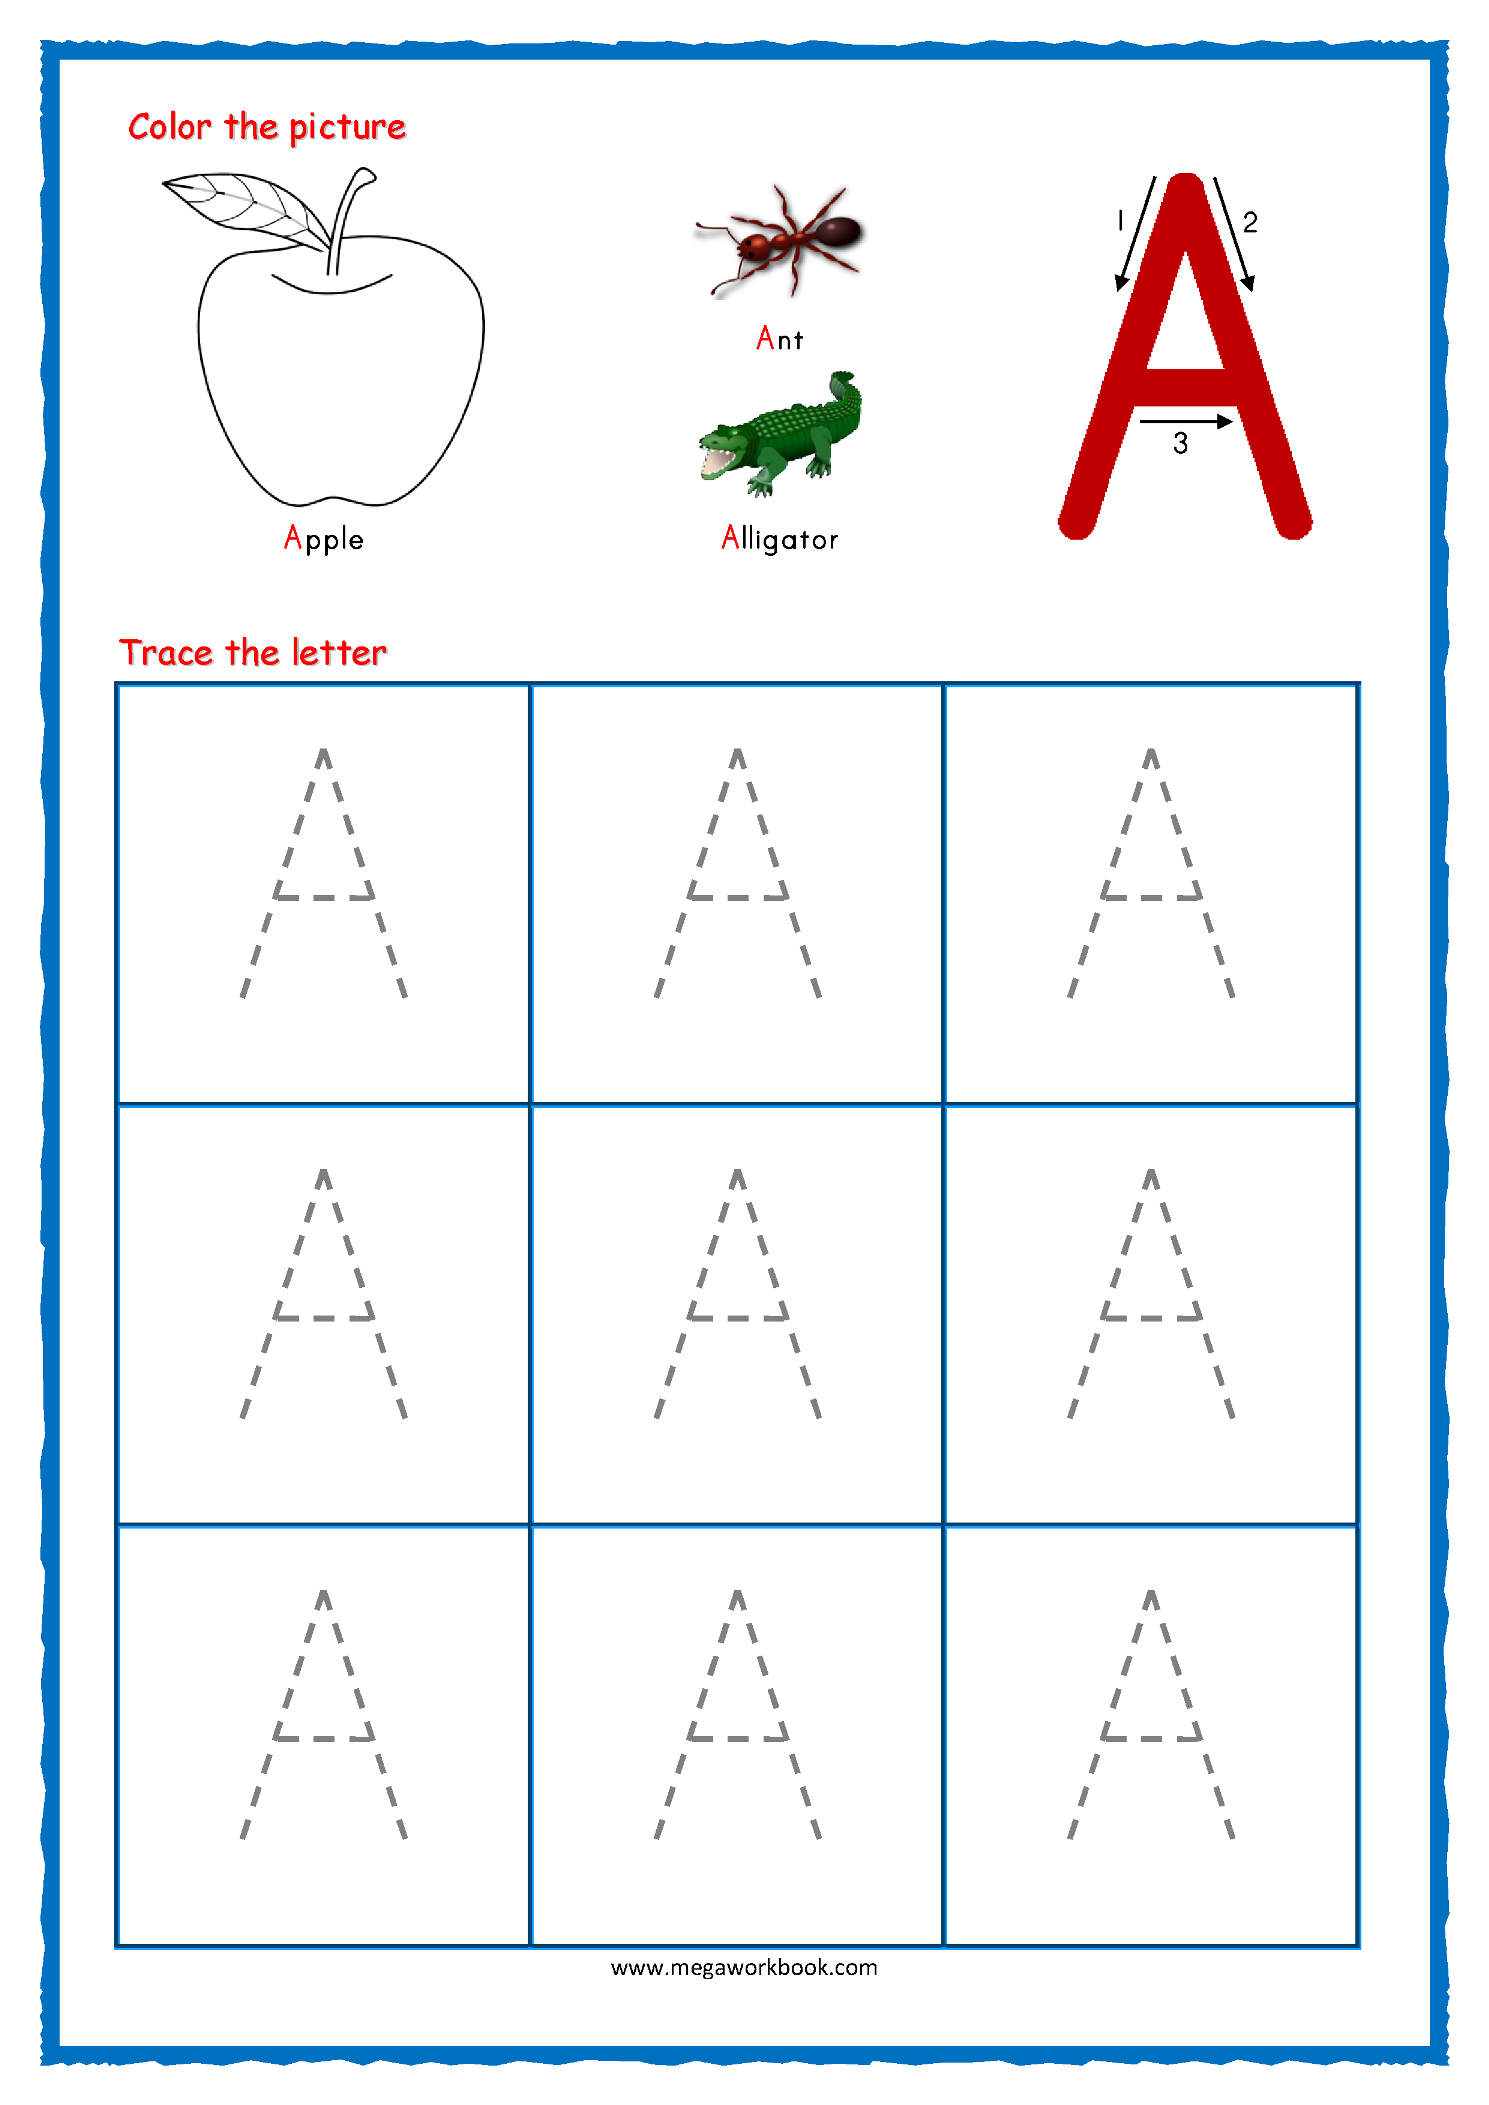 Coloring Book : Coloring Book Alphabet Tracing Worksheets throughout Tracing Letters Free Worksheets